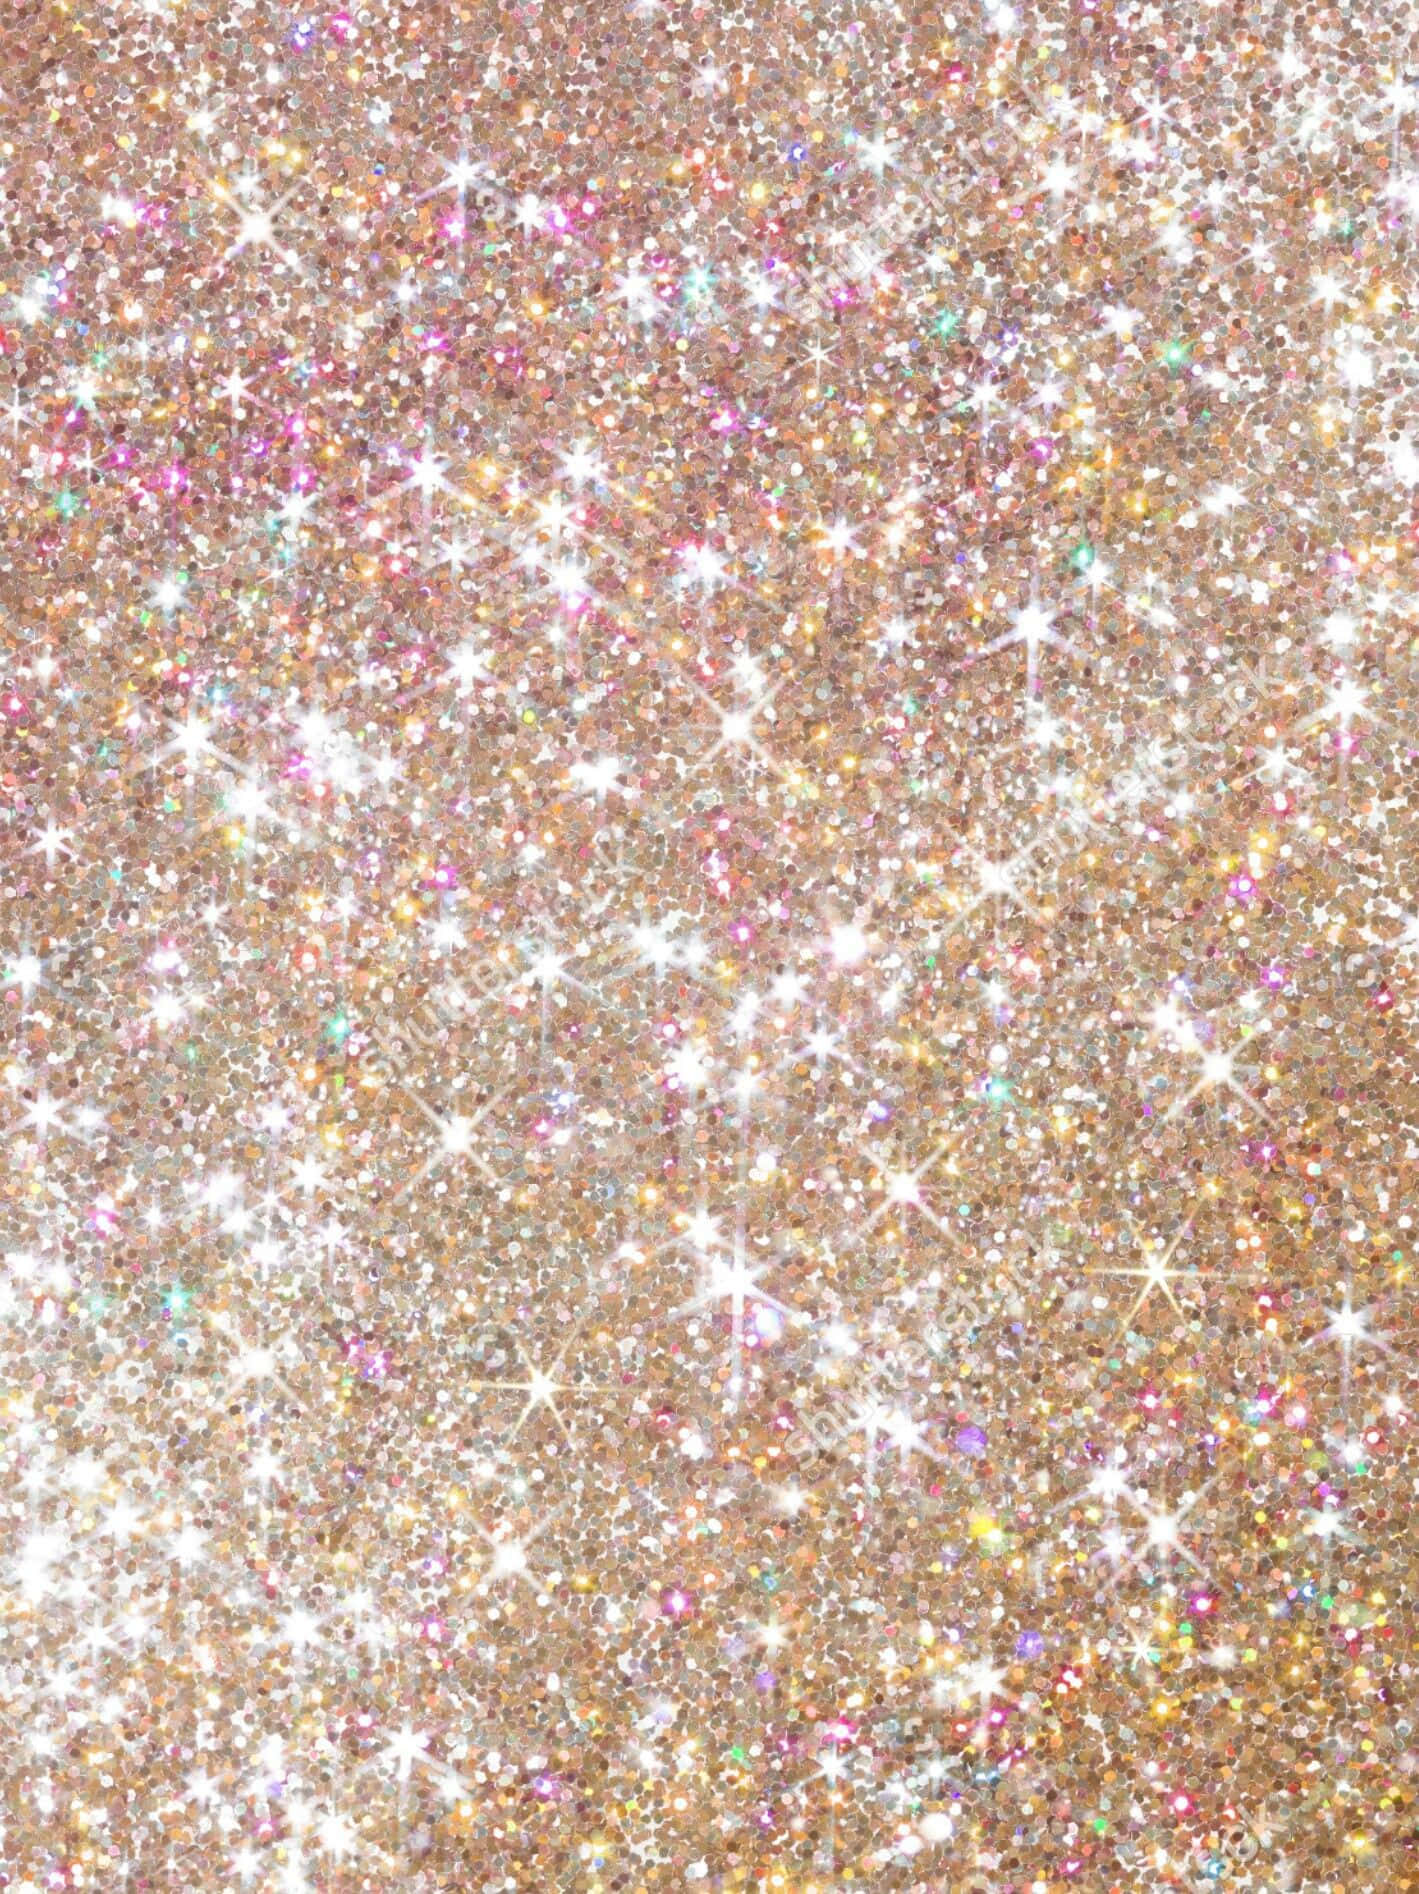 Sparkly Gold High Resolution Glitters Background